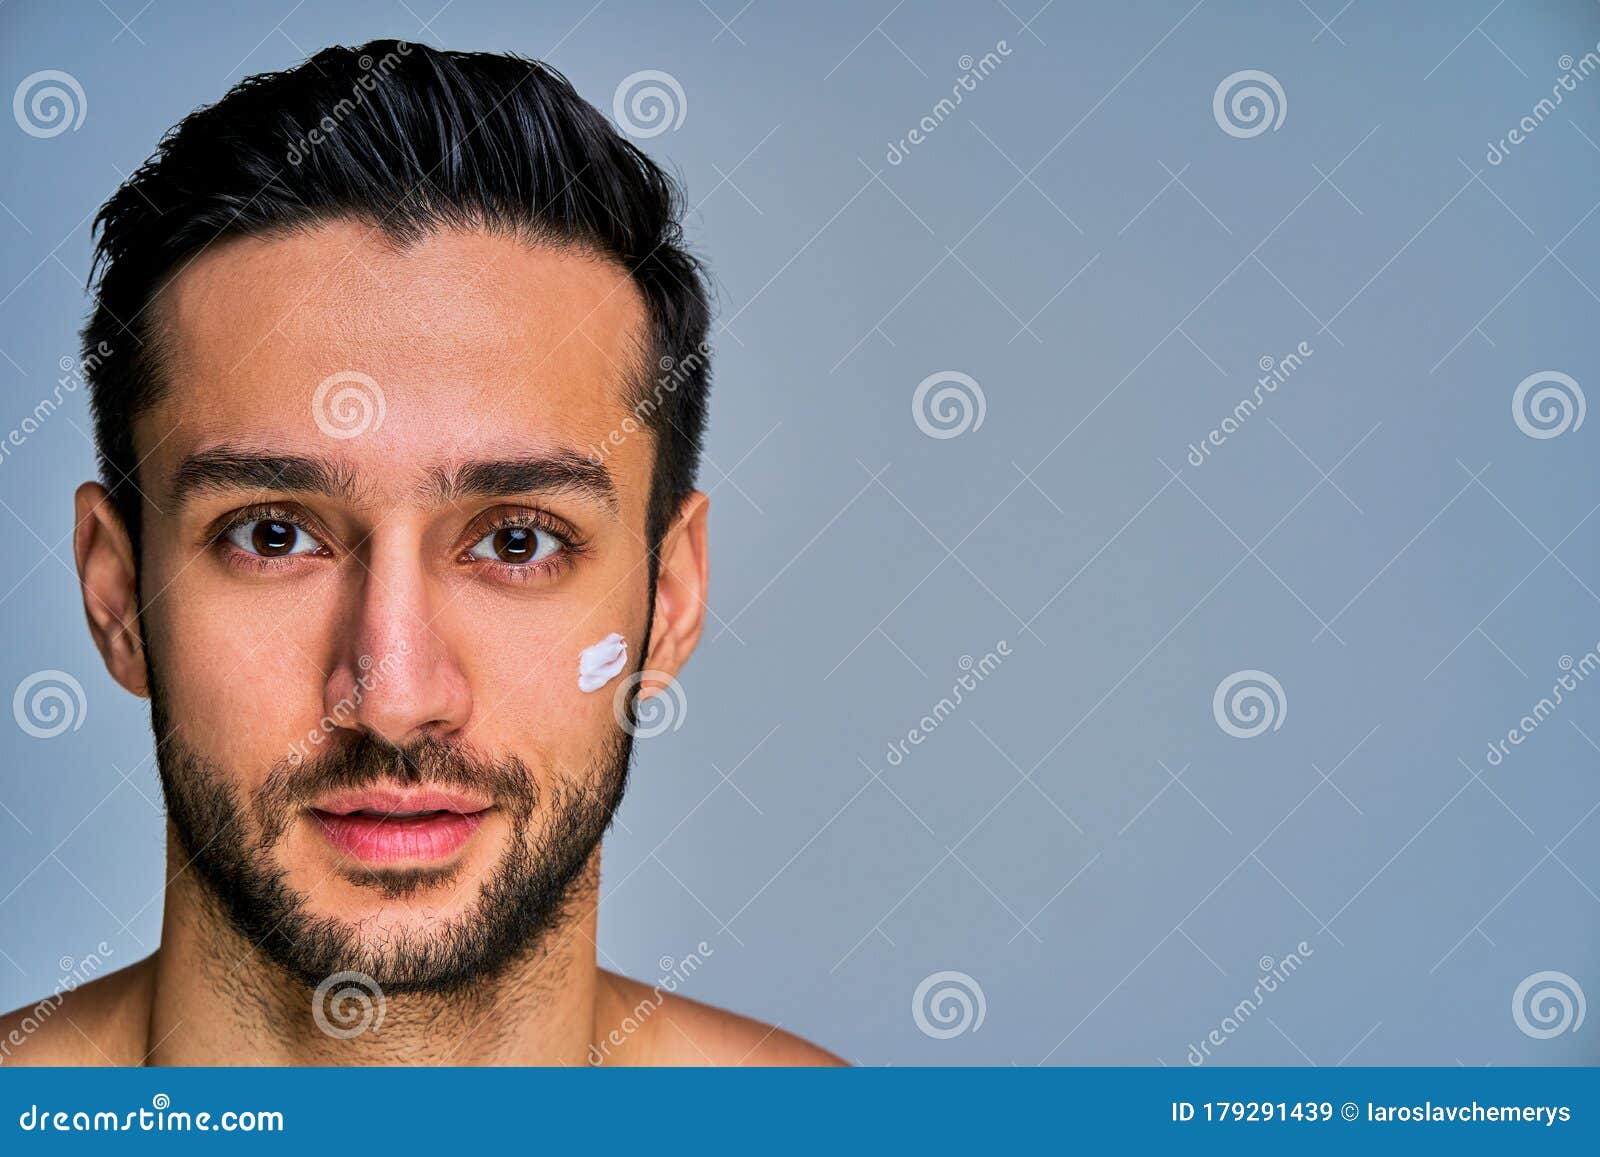 Closeup Positive Guy with a Black Beard with White Spot of Cream on His  Cheek. Cosmetics Concept Stock Image - Image of spot, camera: 179291439